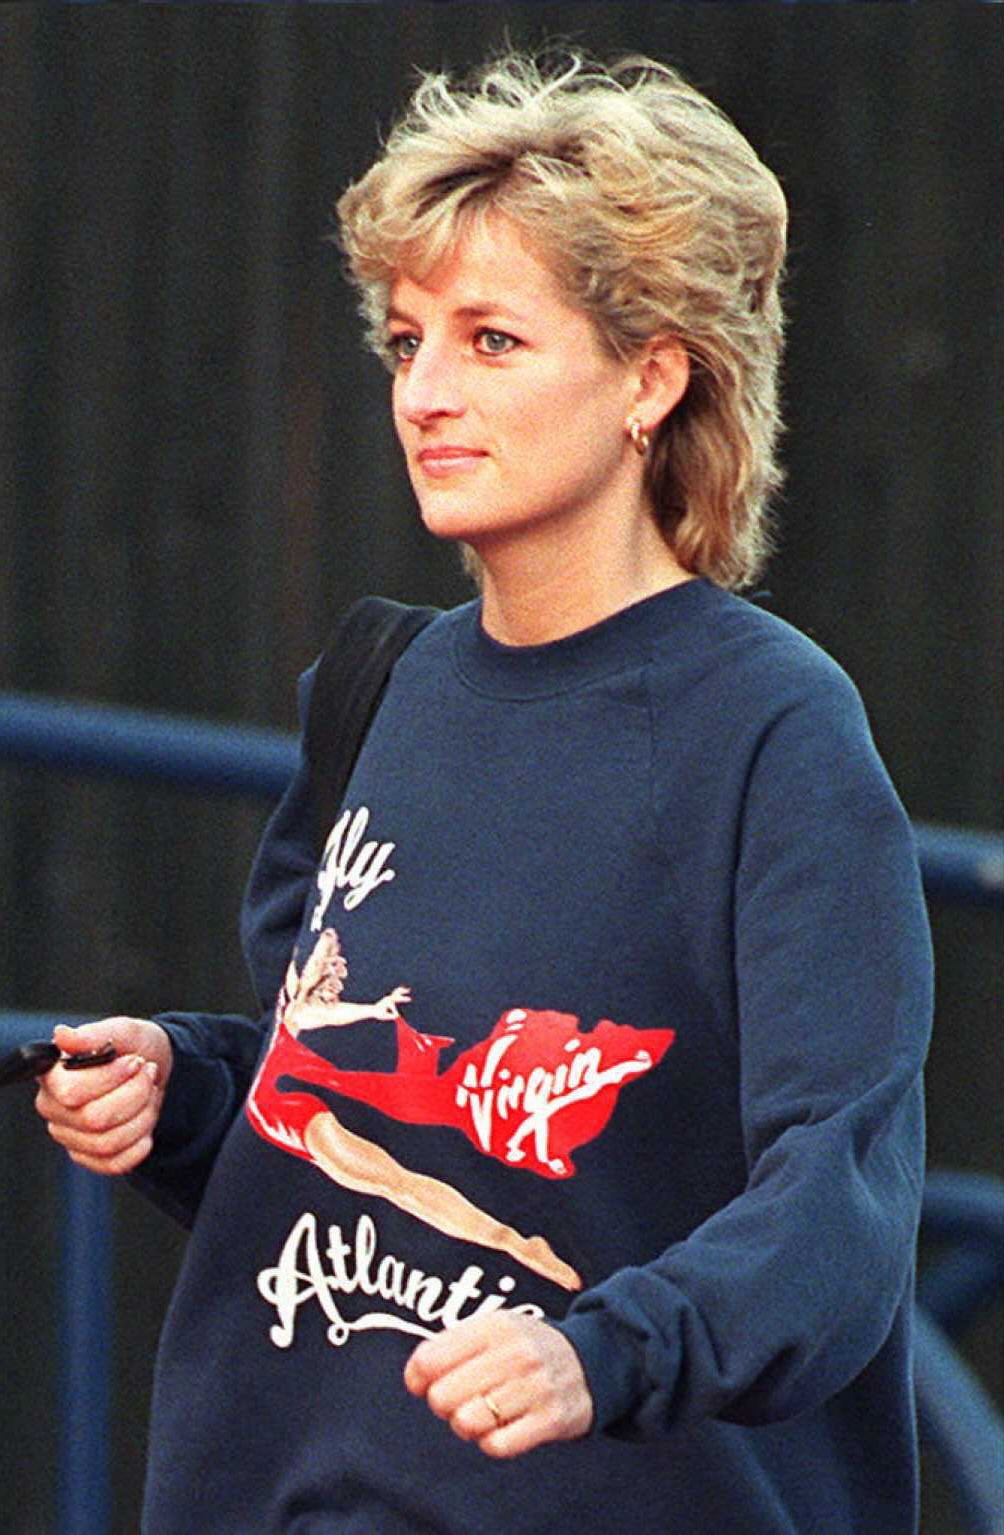 Diana spoke of her history of disordered eating in 1995